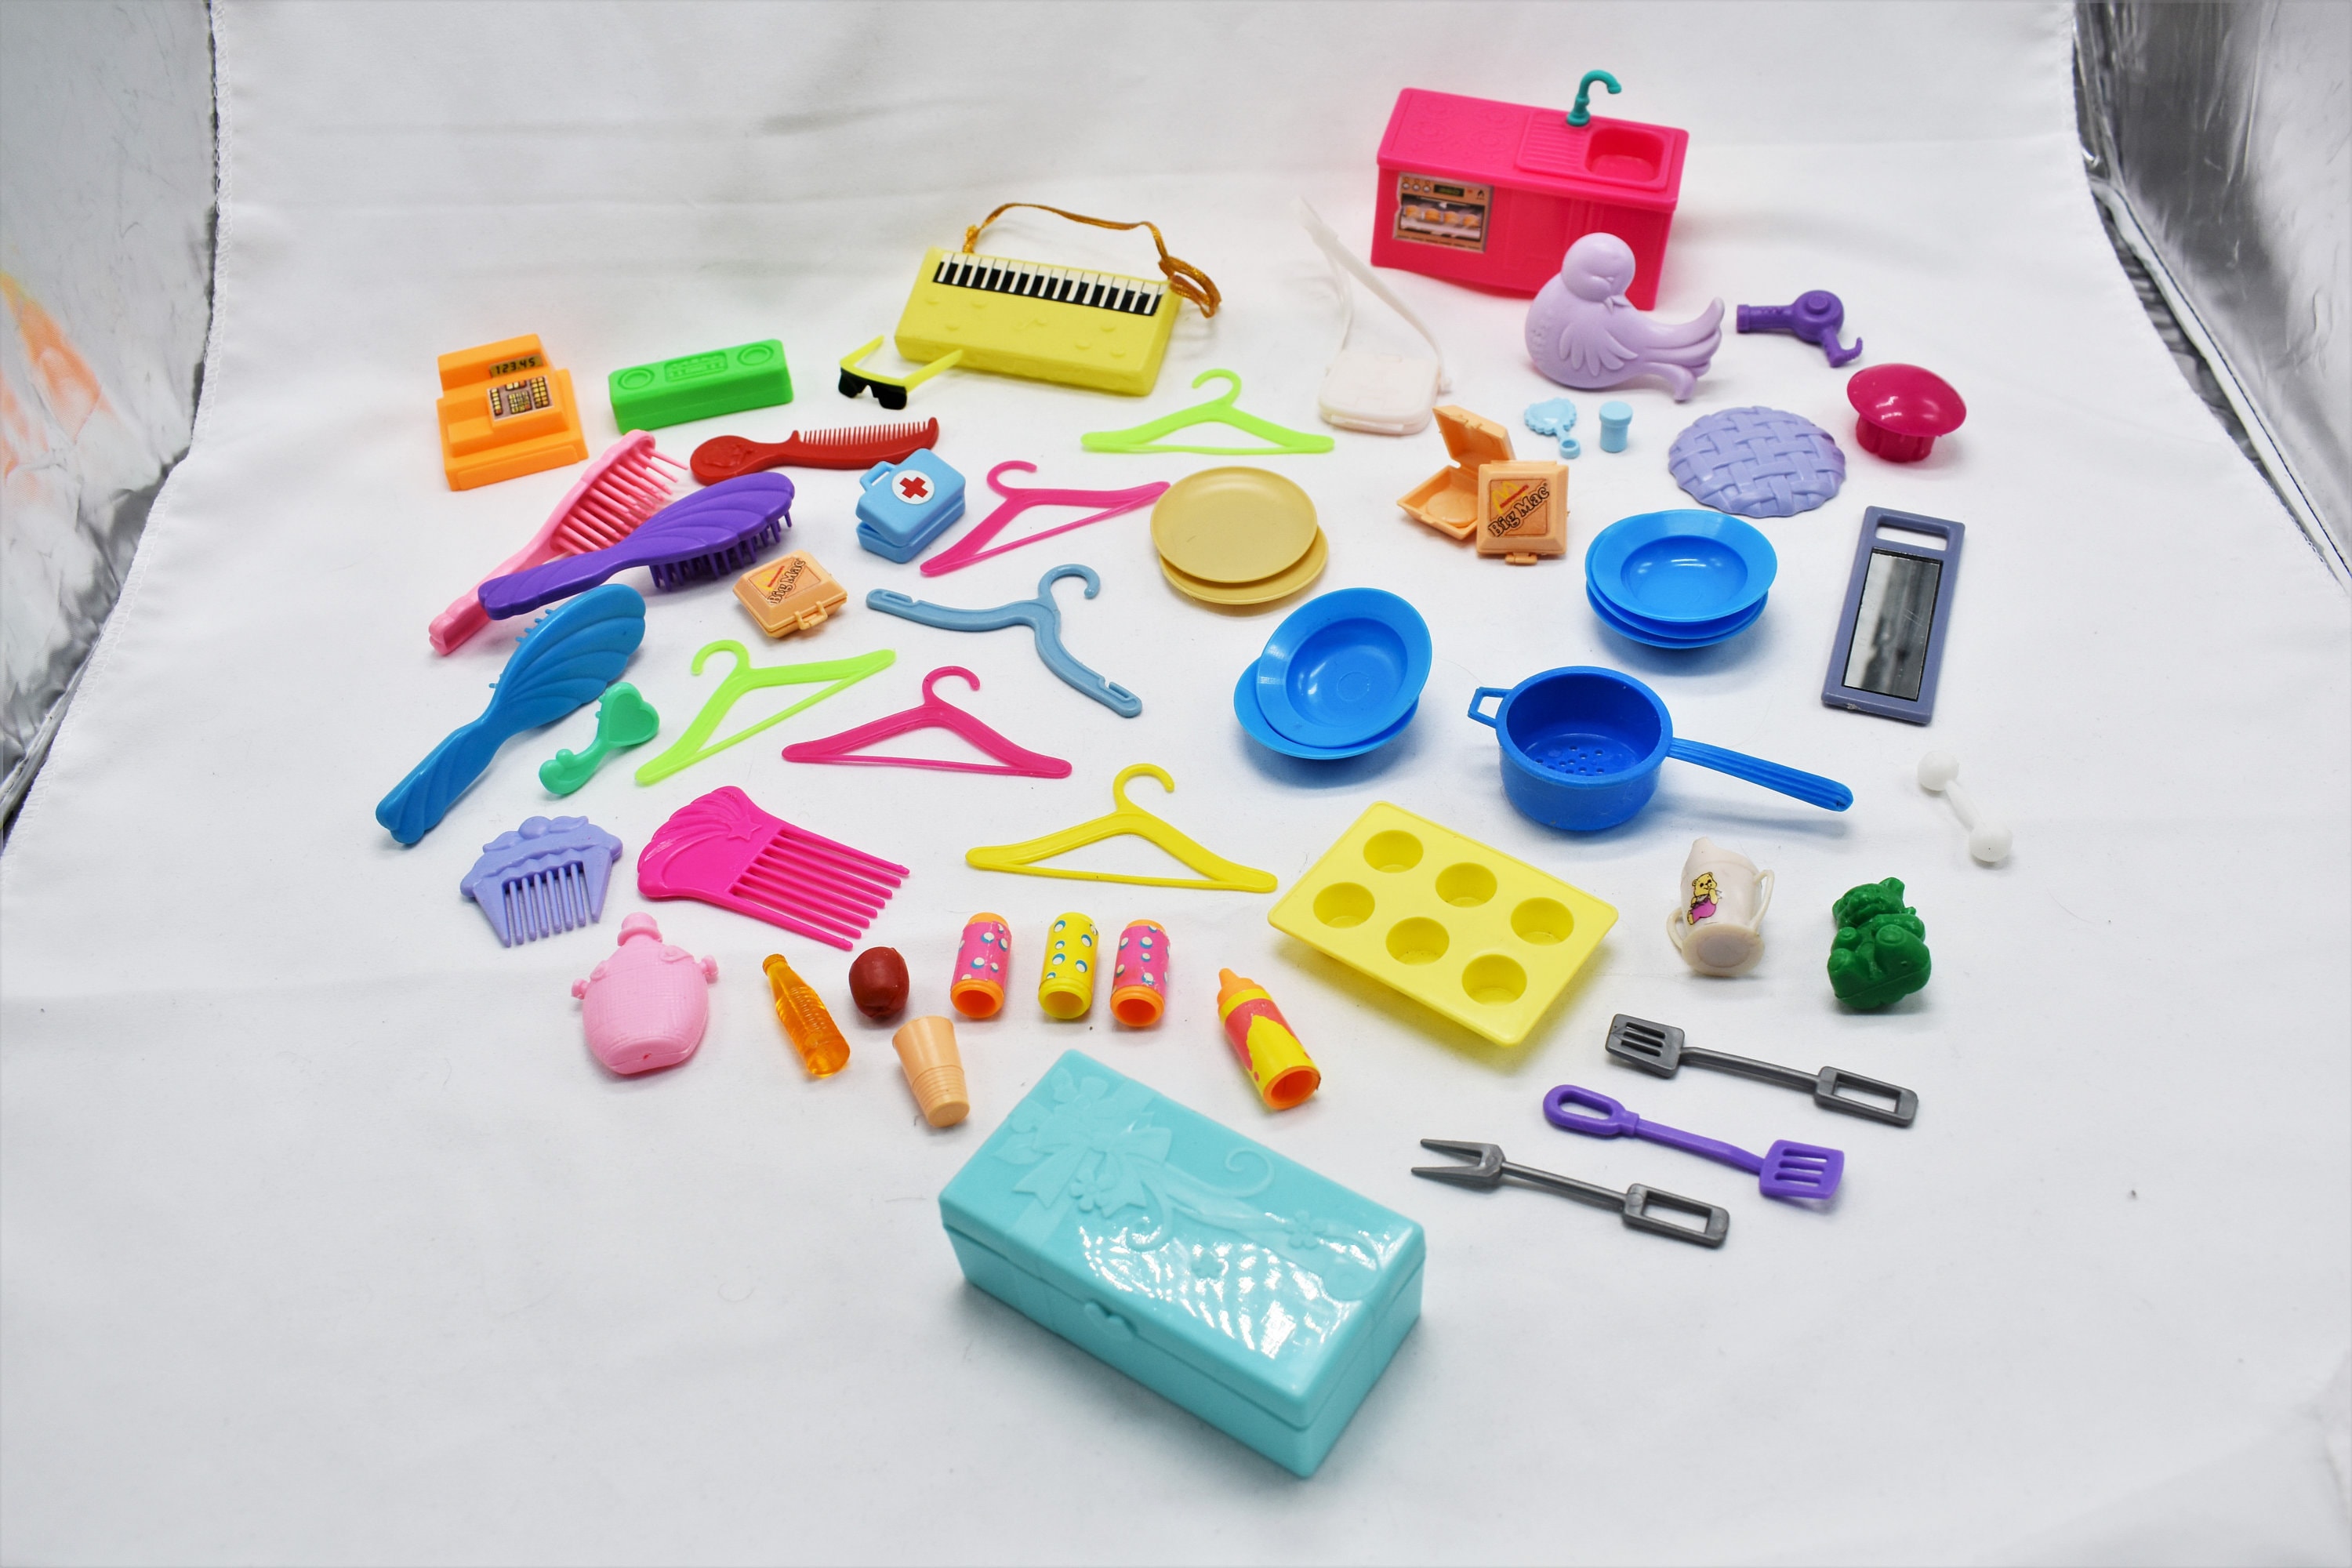 Vintage Barbie Accessories Mixed Lot - 70s, 80s, and 90s Mattel Barbie doll  toy miniature accessories (kitchen, food, bath, furniture)